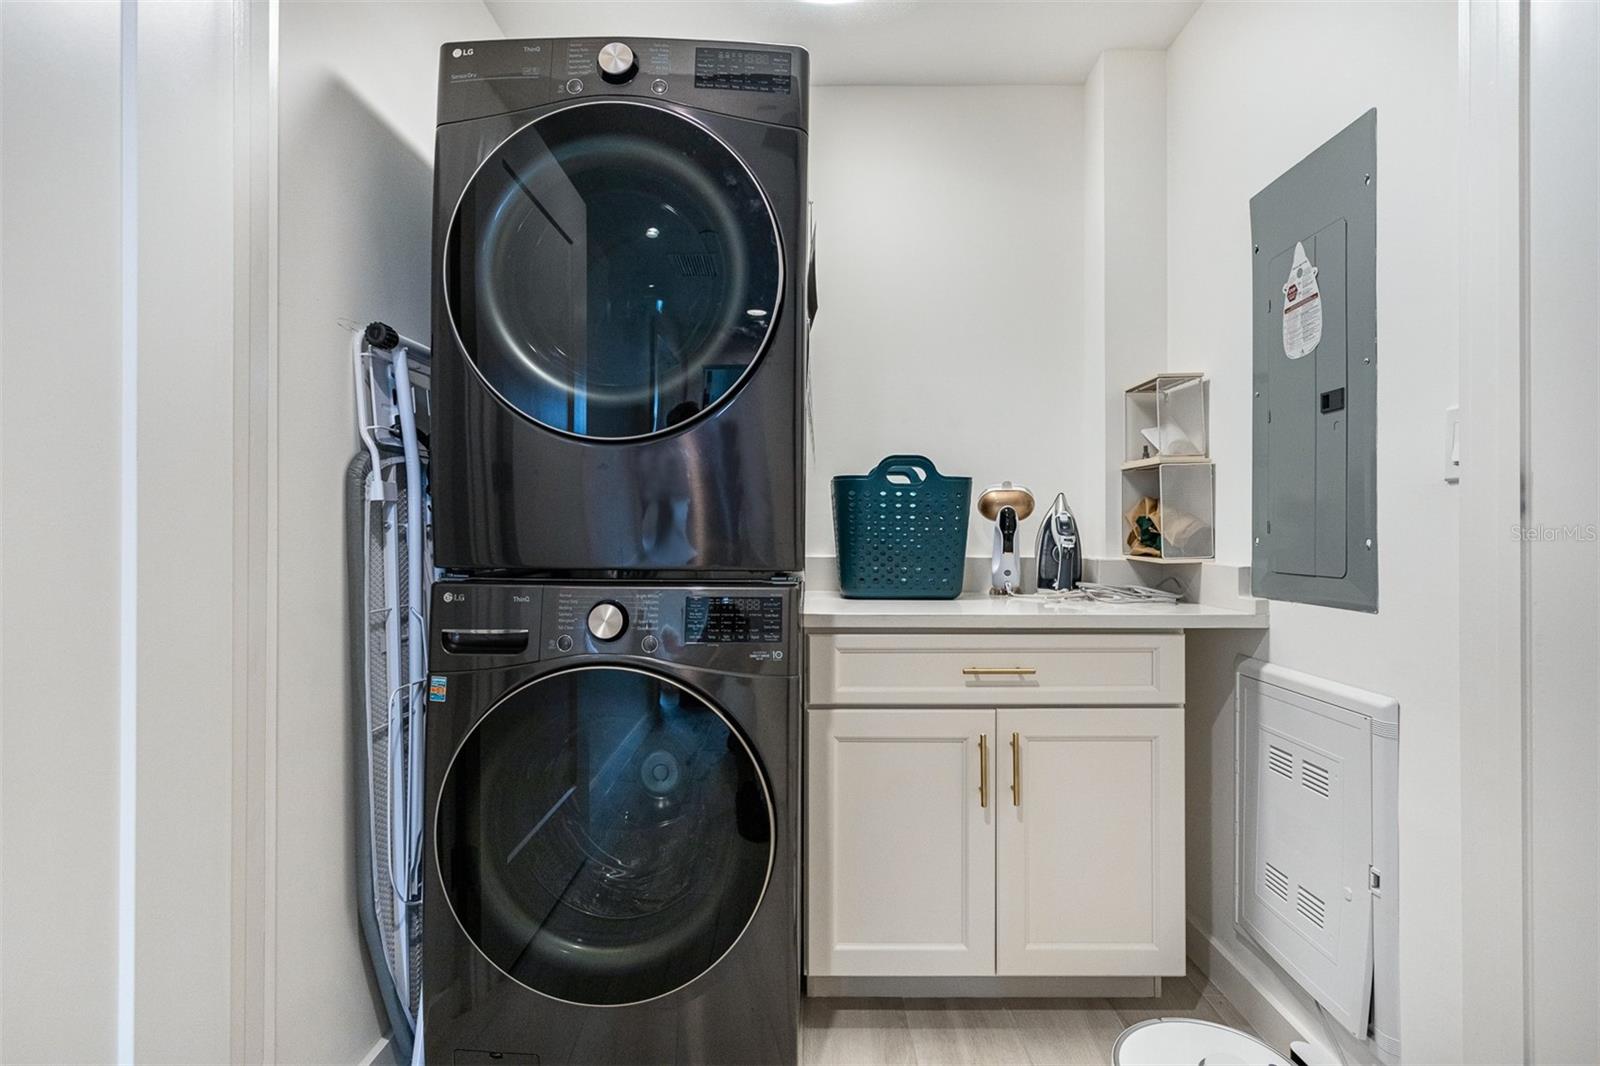 Desirable laundry room with stackable washer and dryer, plus folding area and cabinets